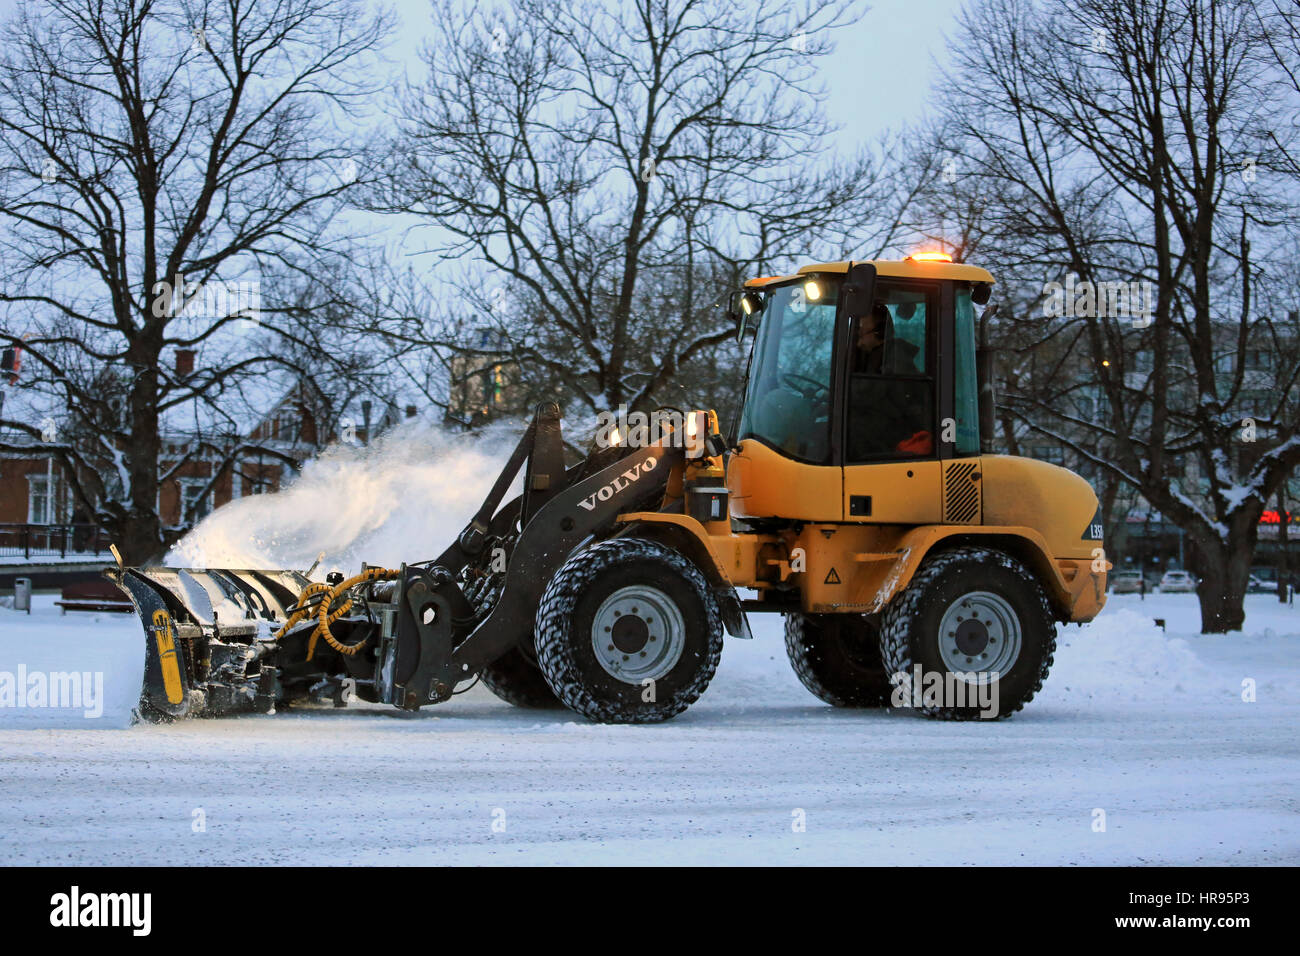 SALO, FINLAND - FEBRUARY 24, 2017: Unknown operator removes snow with Volvo L35B compact wheel loader equipped with snowplow on a winter evening in So Stock Photo